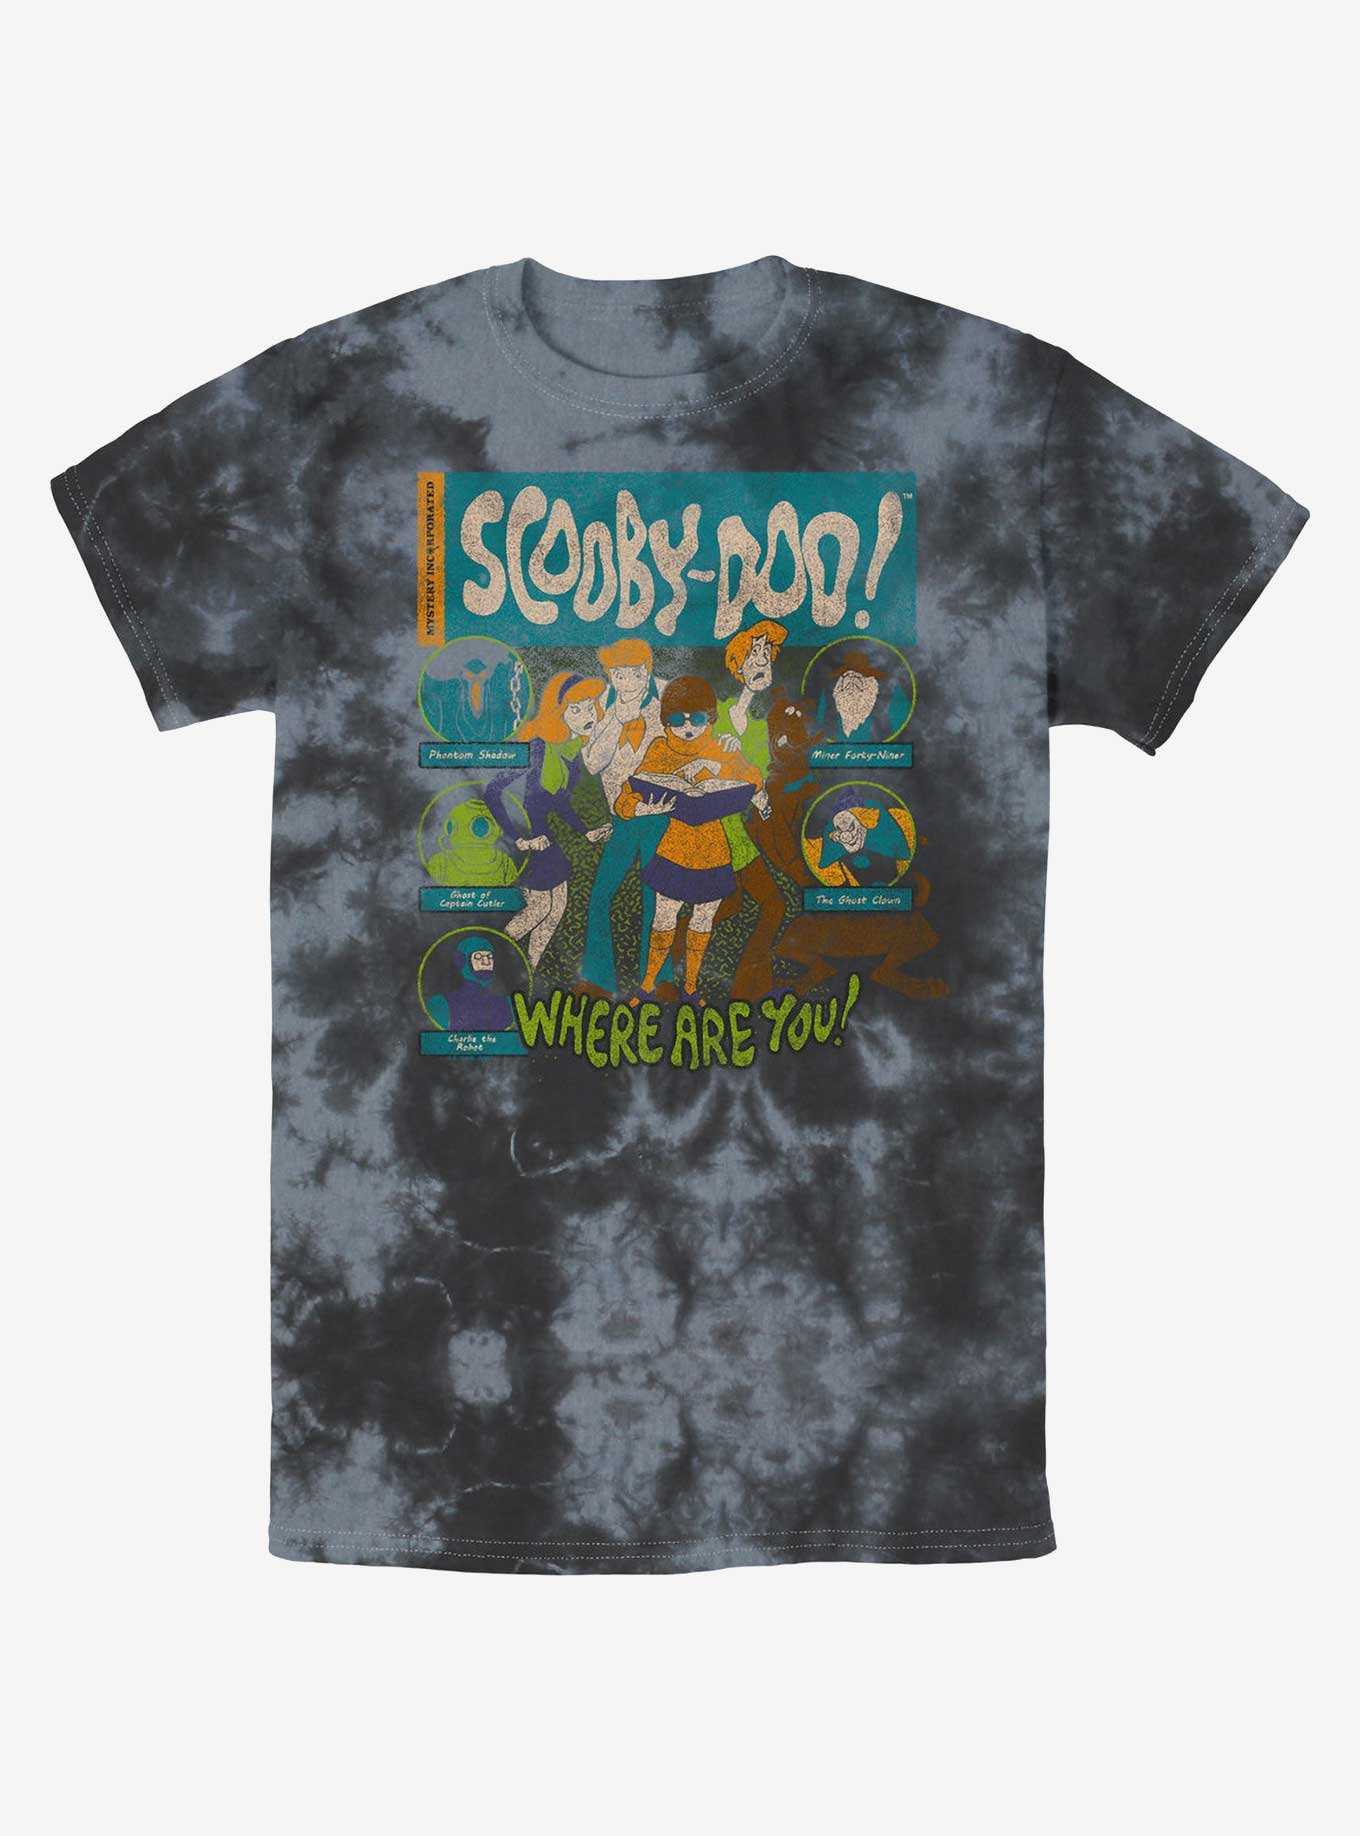 Scooby Doo Mystery Poster Tie-Dye T-Shirt, , hi-res